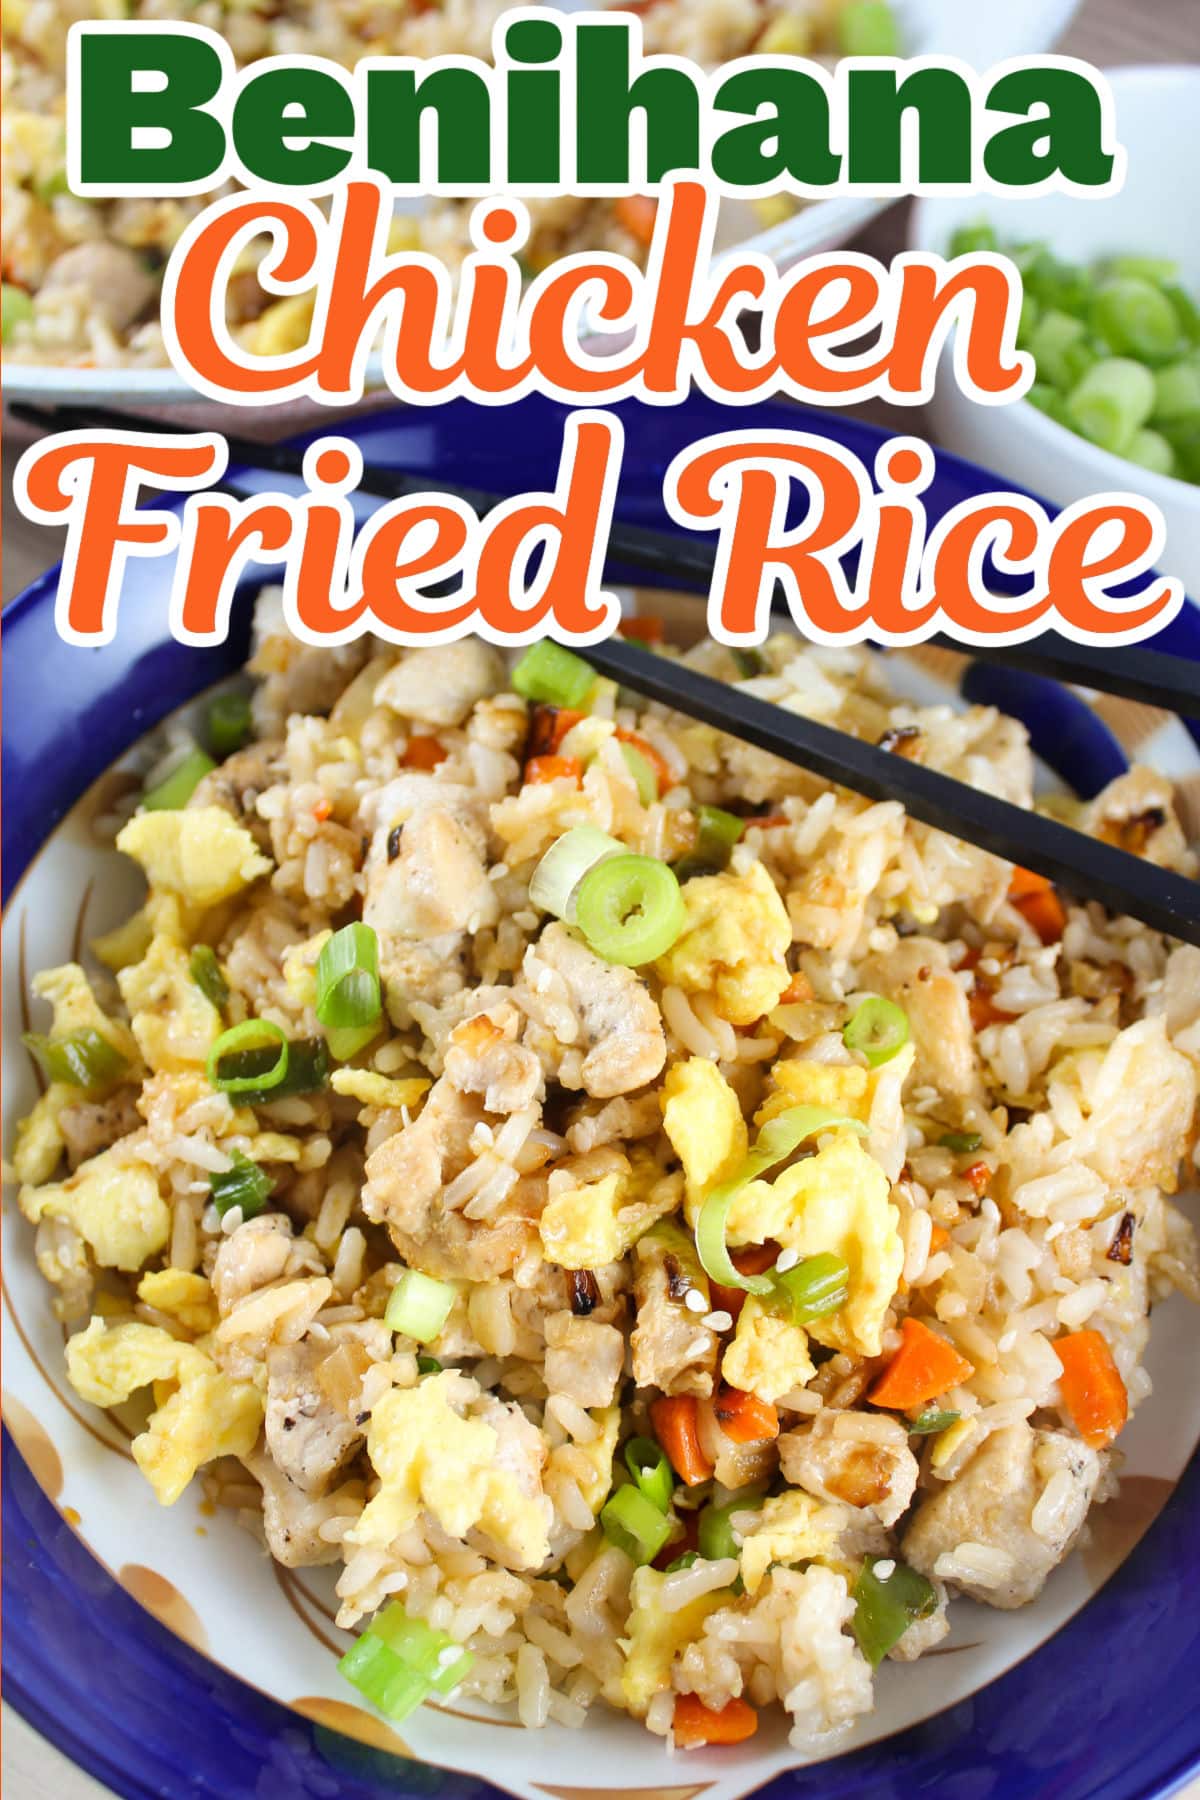 Benihana Chicken Fried Rice is a favorite dish and it's so easy to capture the flavor at home! This fried rice is loaded with tender chicken, savory vegetables, fluffy scrambled eggs and a zippy garlic butter!  via @foodhussy